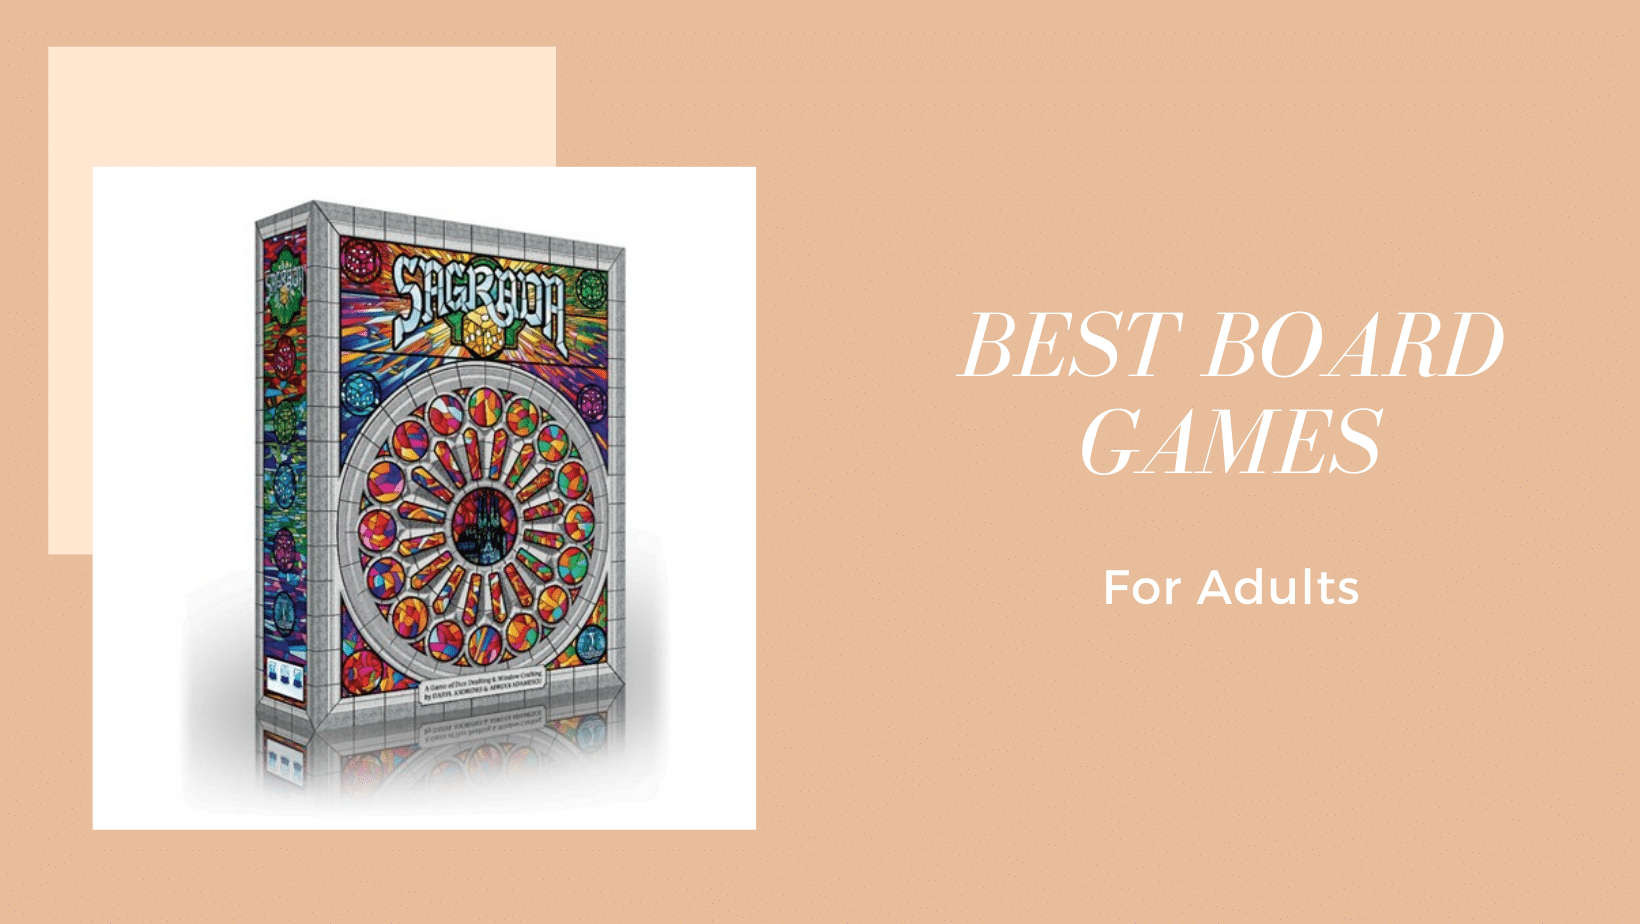 The board game Sagrada as one of the best board games for adults.